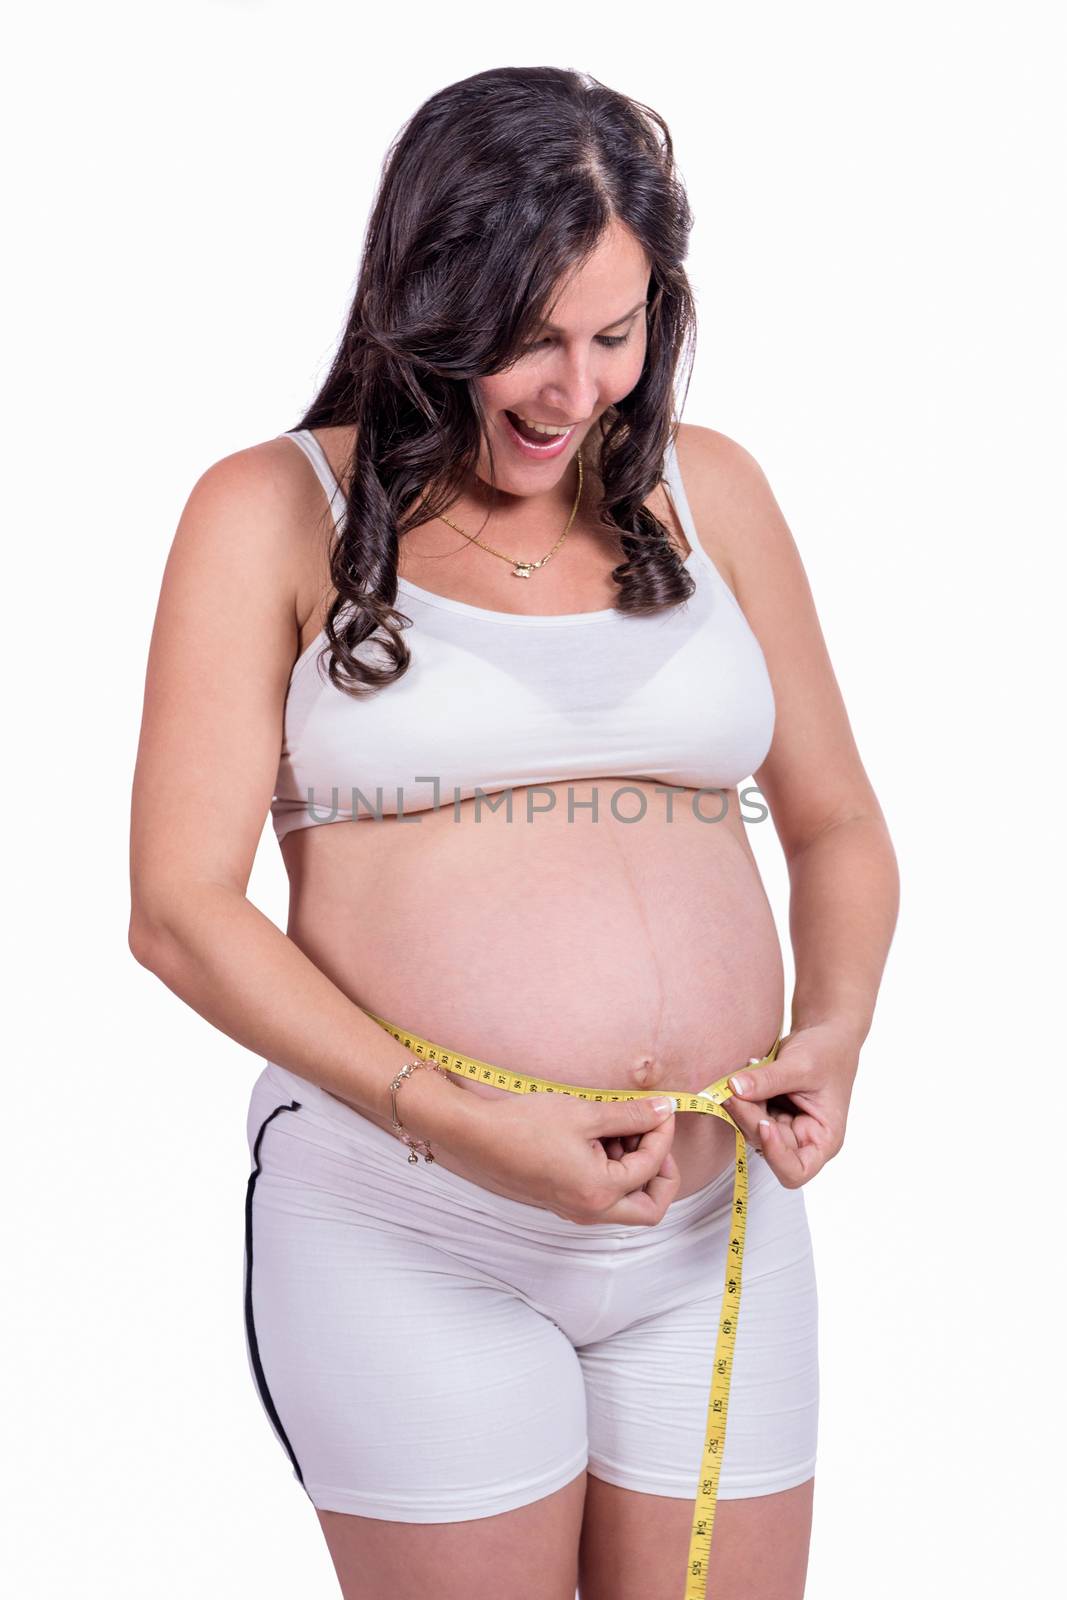 A pregnant woman measuring her belly